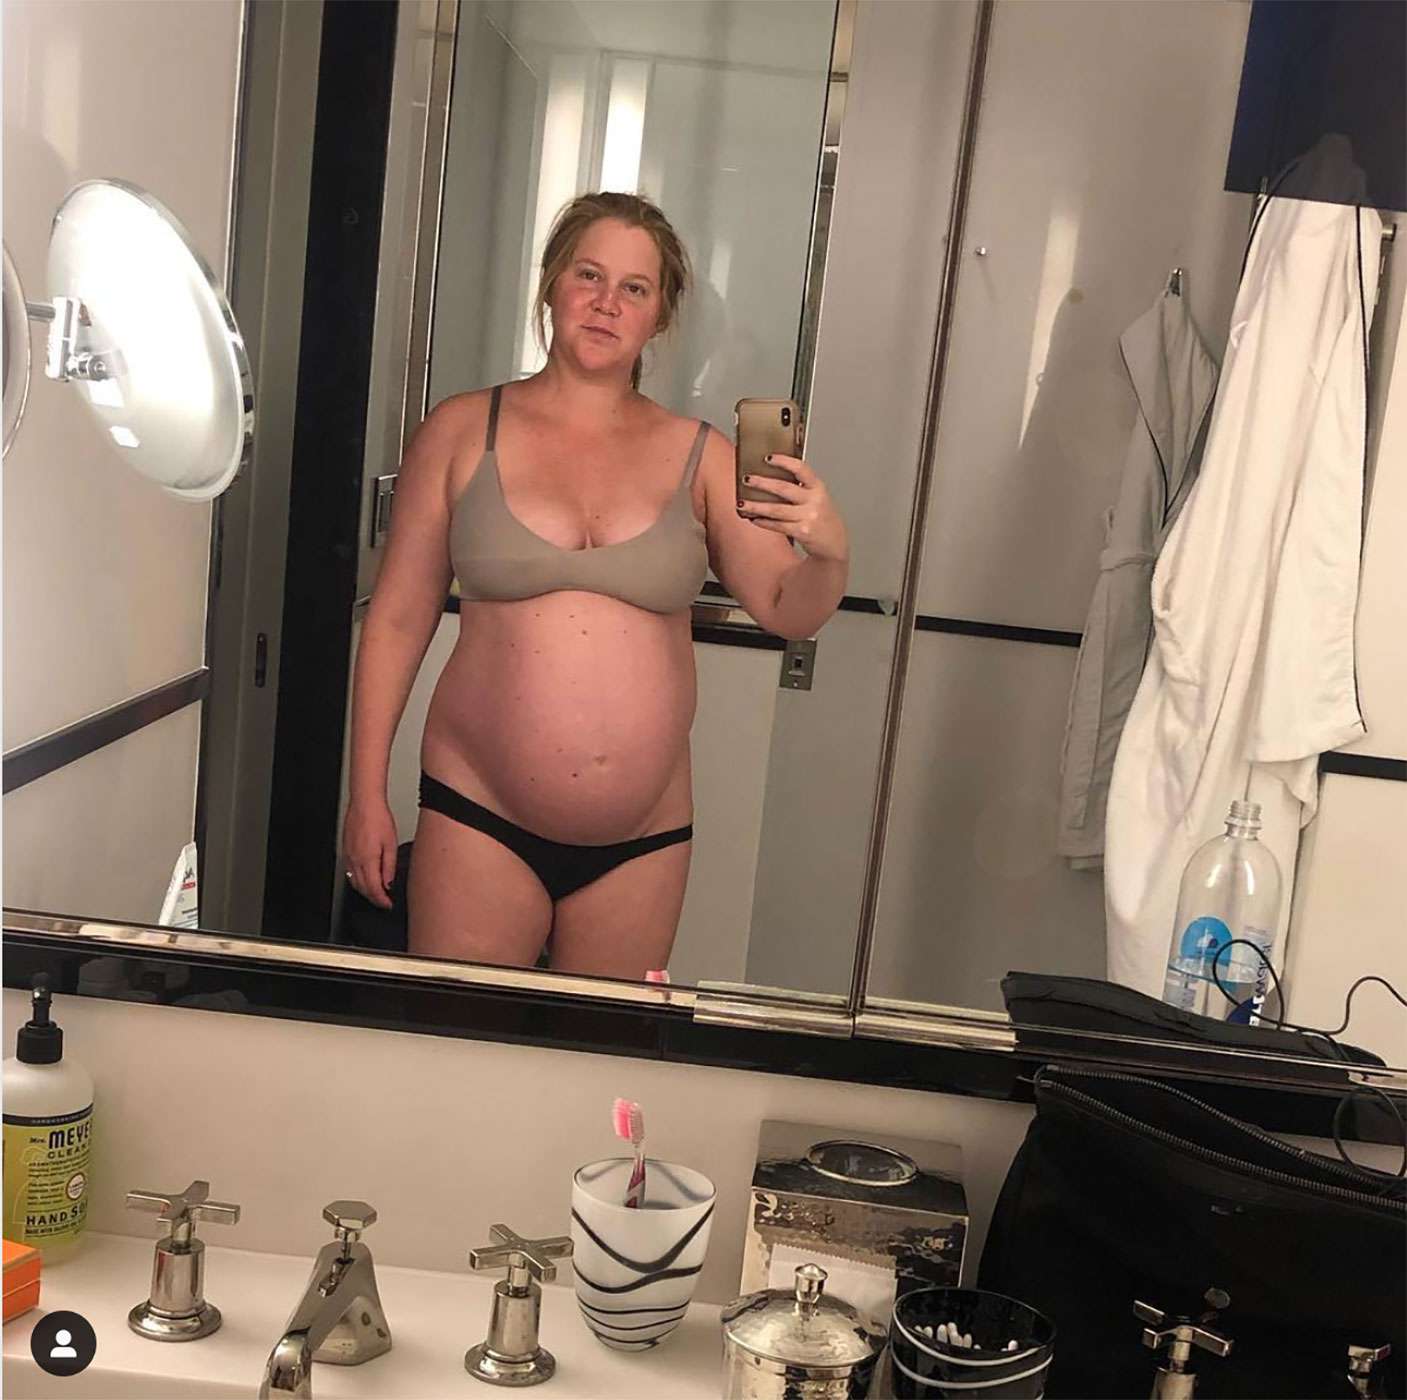 Amy Schumer shares images of herself naked in the bath 